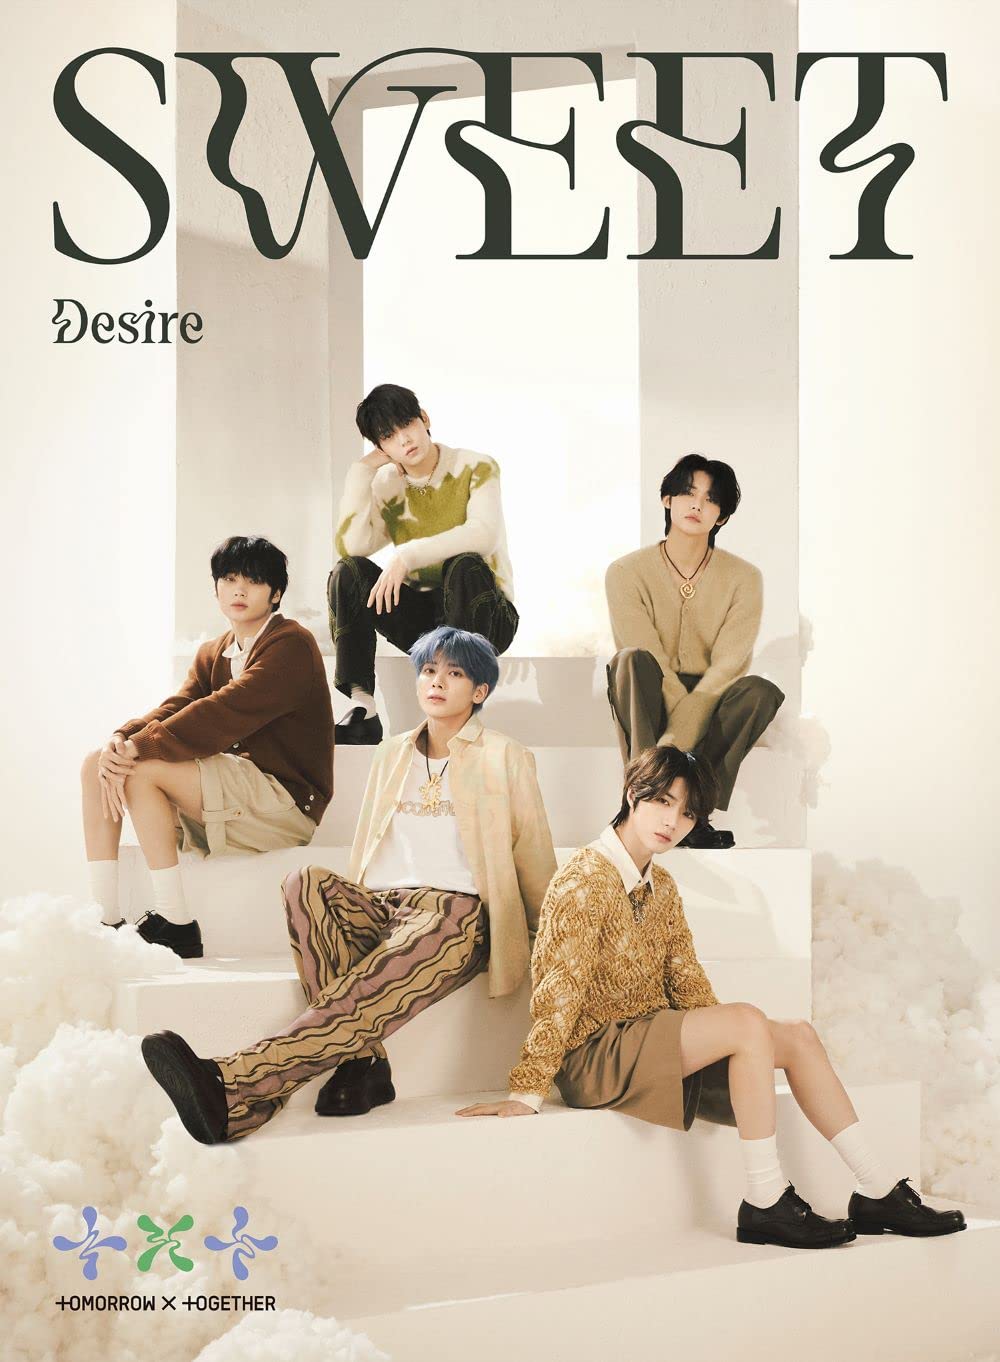 Sweet - Limited Version A - incl. Hardcover Slipcase w/48pg Phoot-book + Selfie Photocard